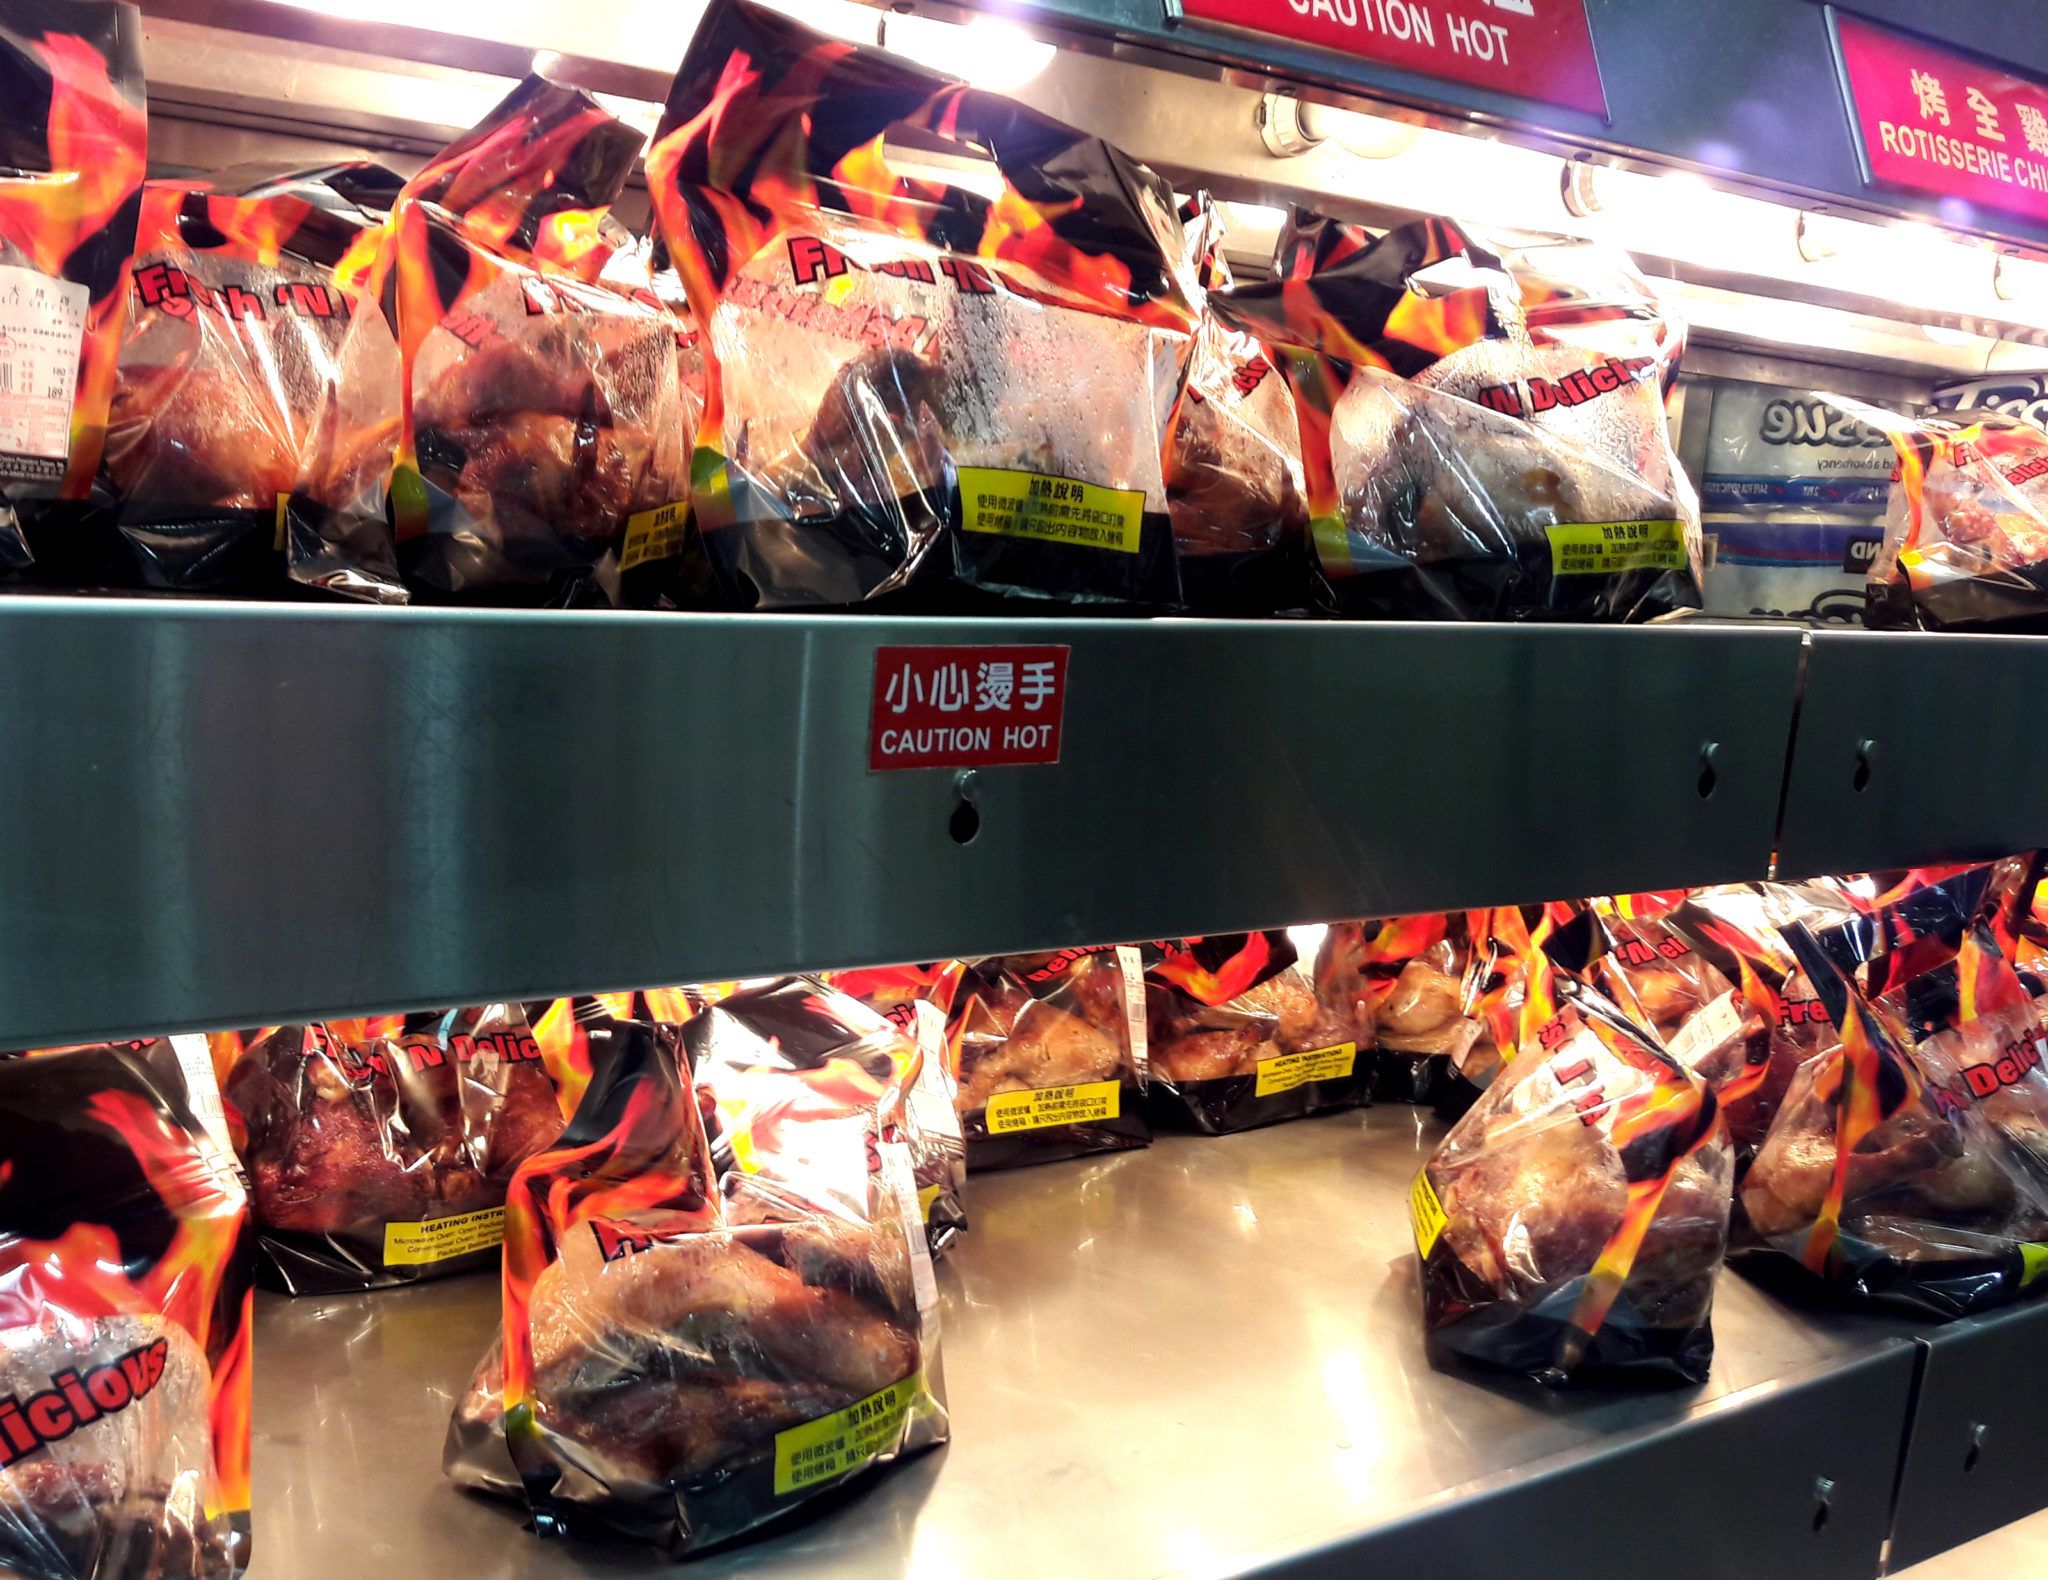 shelves of bagged rotisserie chickens in a supermarket